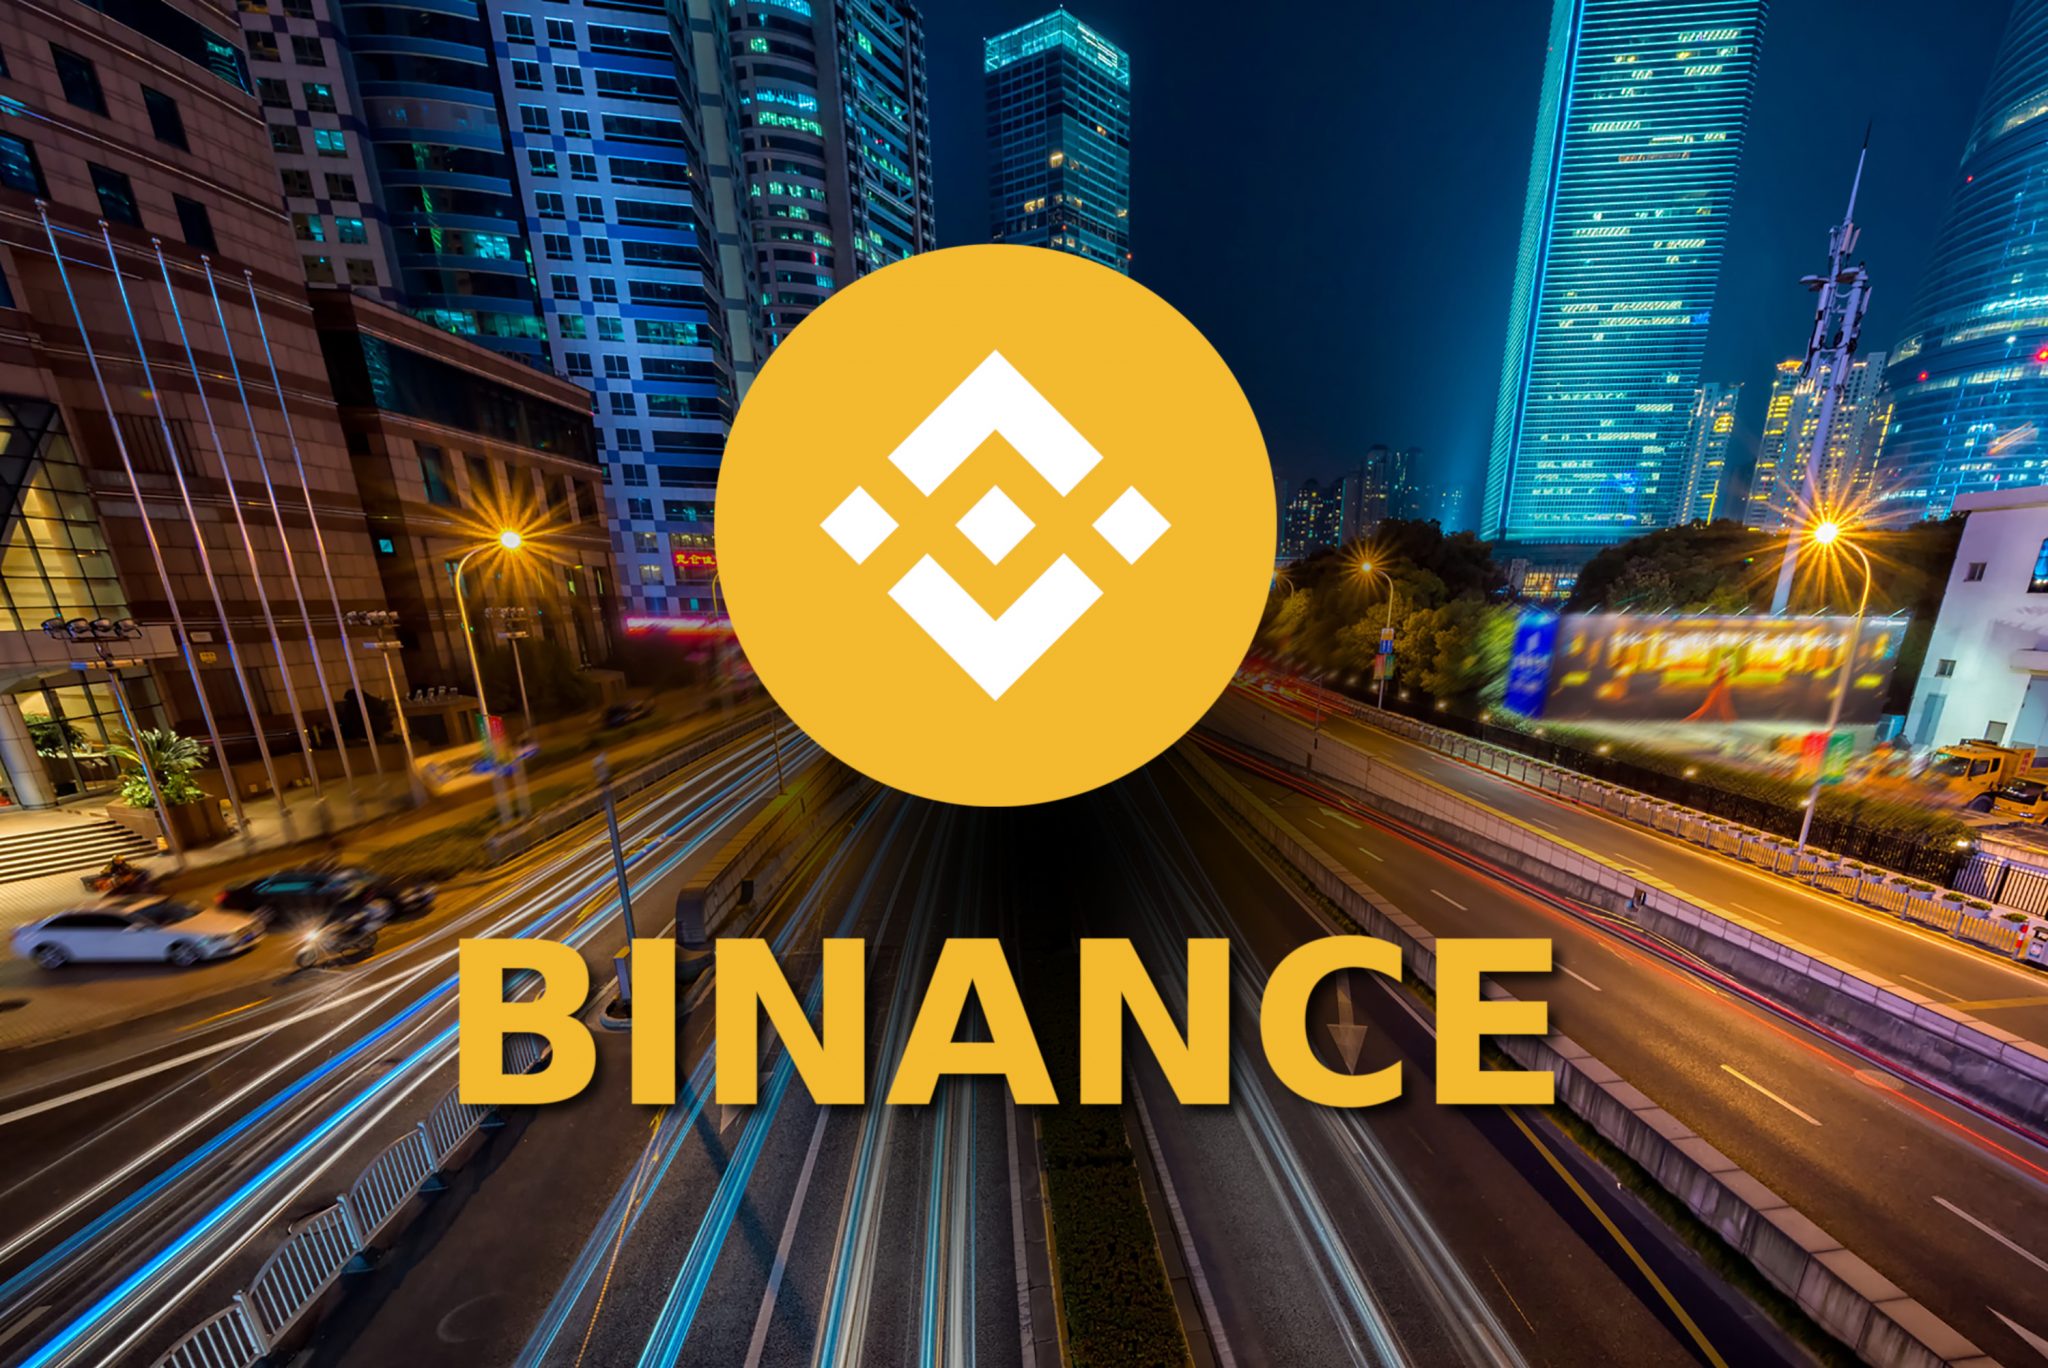 Concept of   Binance coin   moving fast  on the road, a Cryptocurrency blockchain platform , Digital money